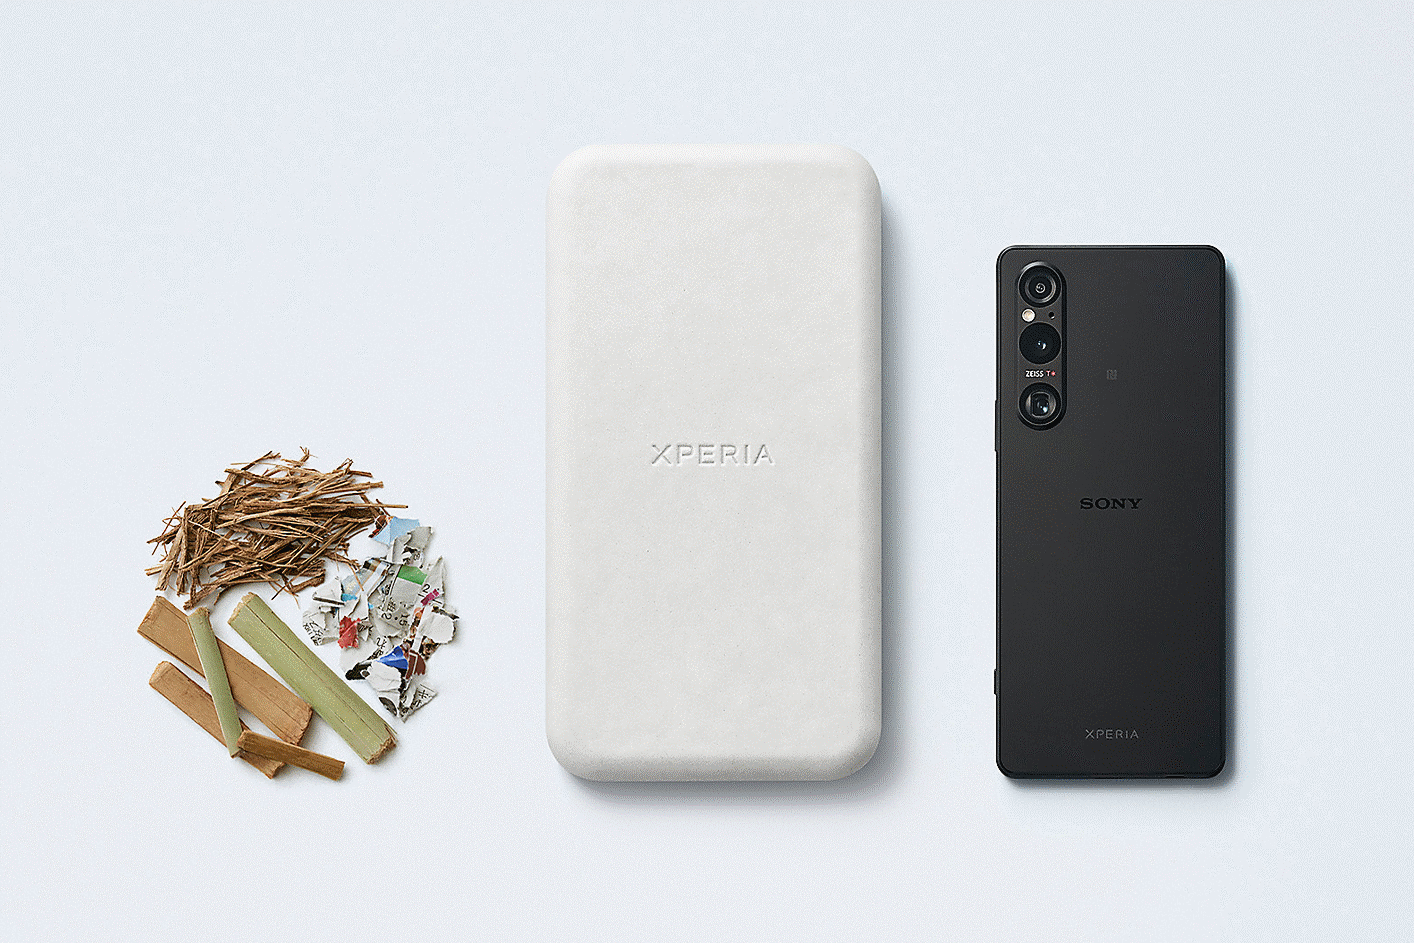 Image of Xperia products alongside the three main components of Sony's Original Blended Material: bamboo, sugar cane and recycled paper.